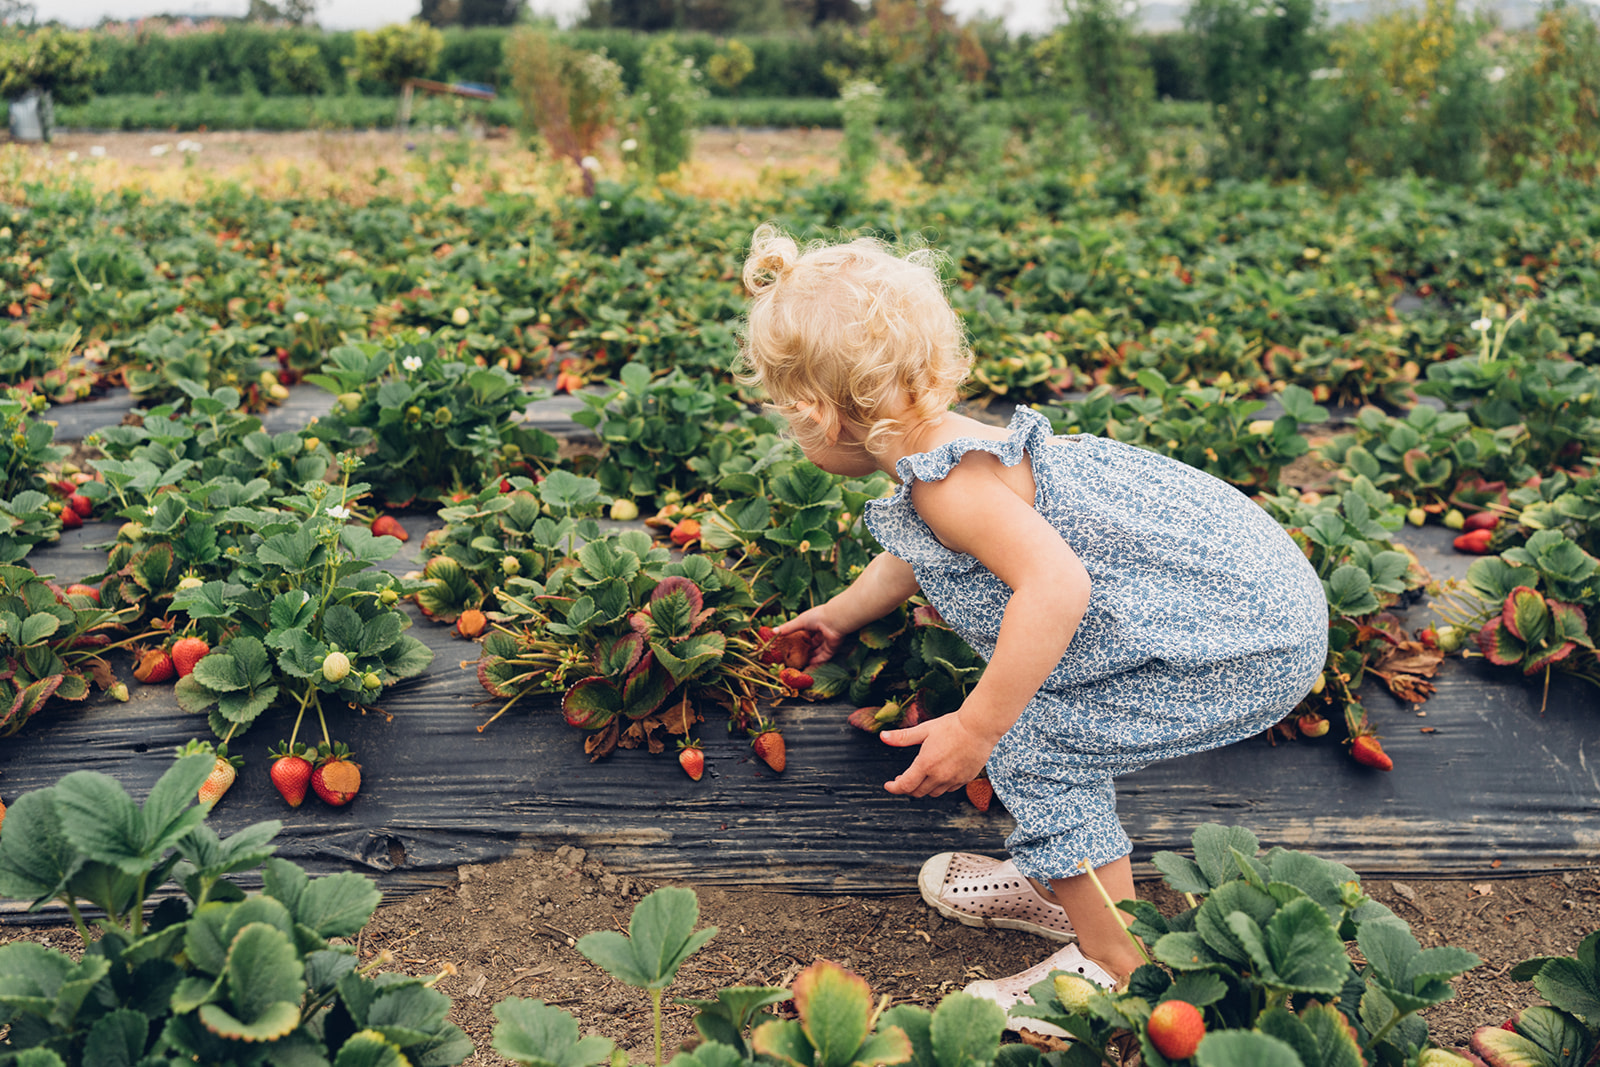 Toddler bending over to pick strawberry in the fields.